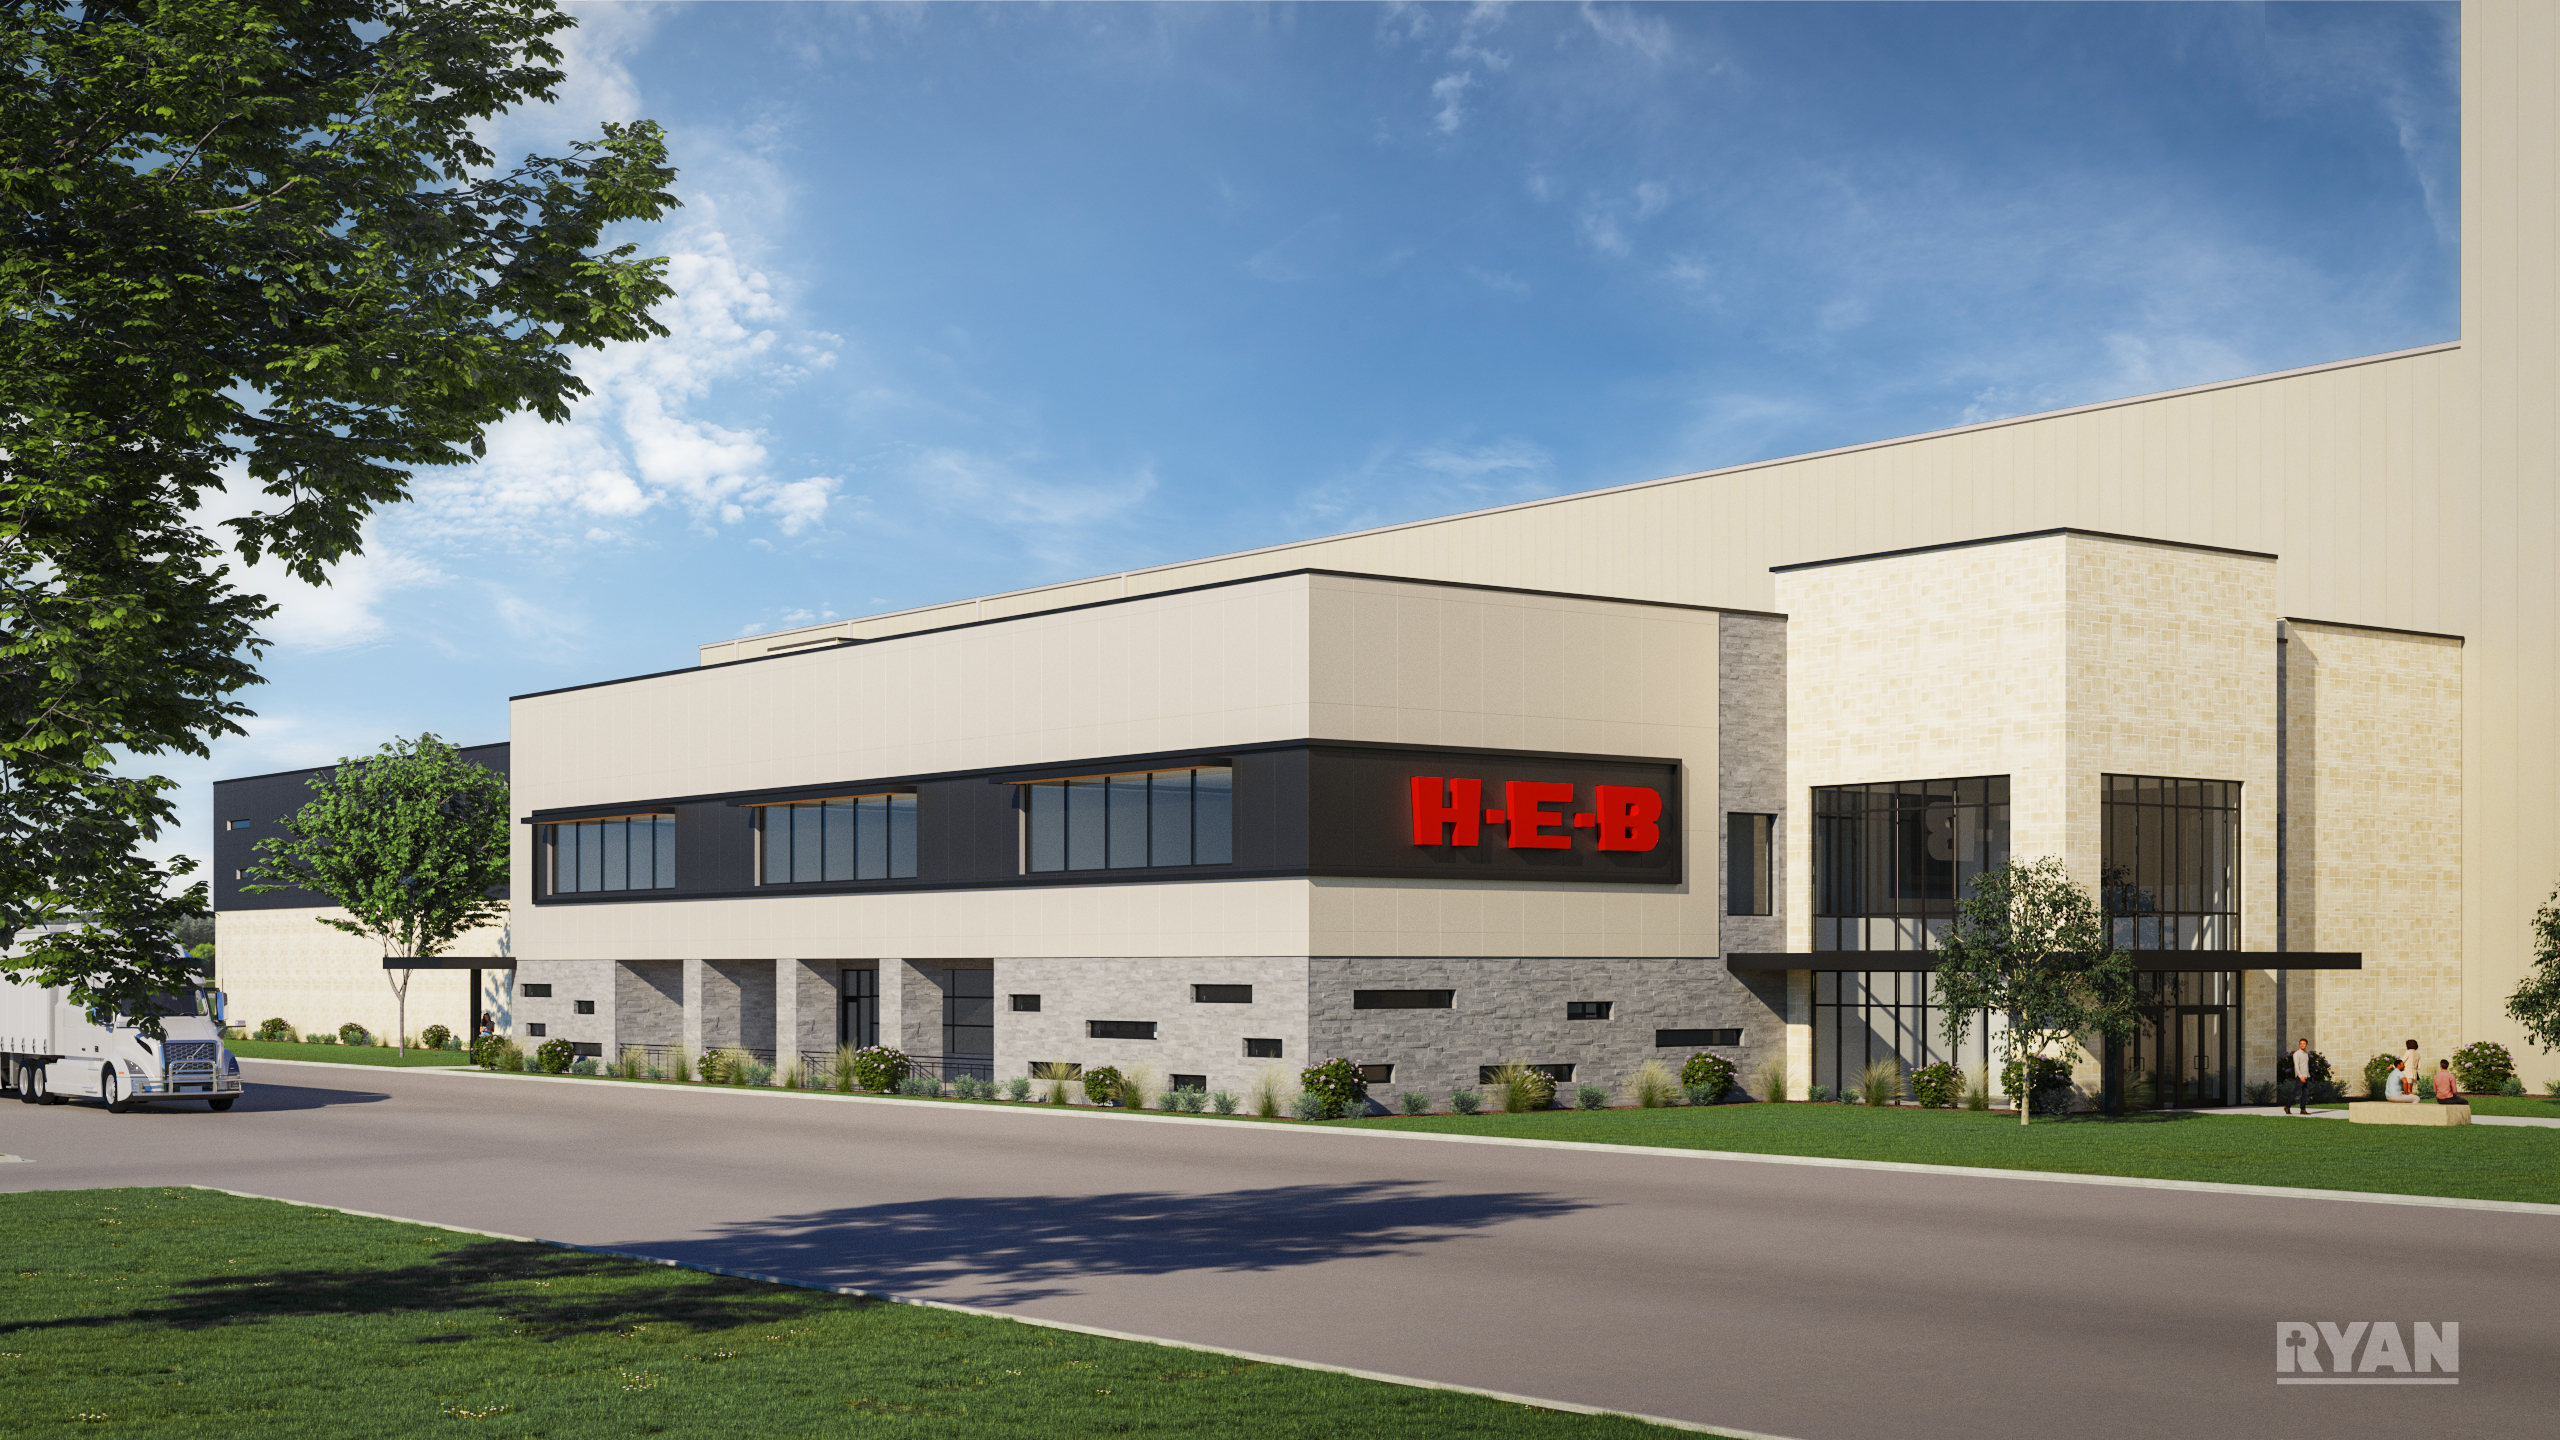  H-E-B Announces Major Expansion with New Distribution Campus in Hempstead